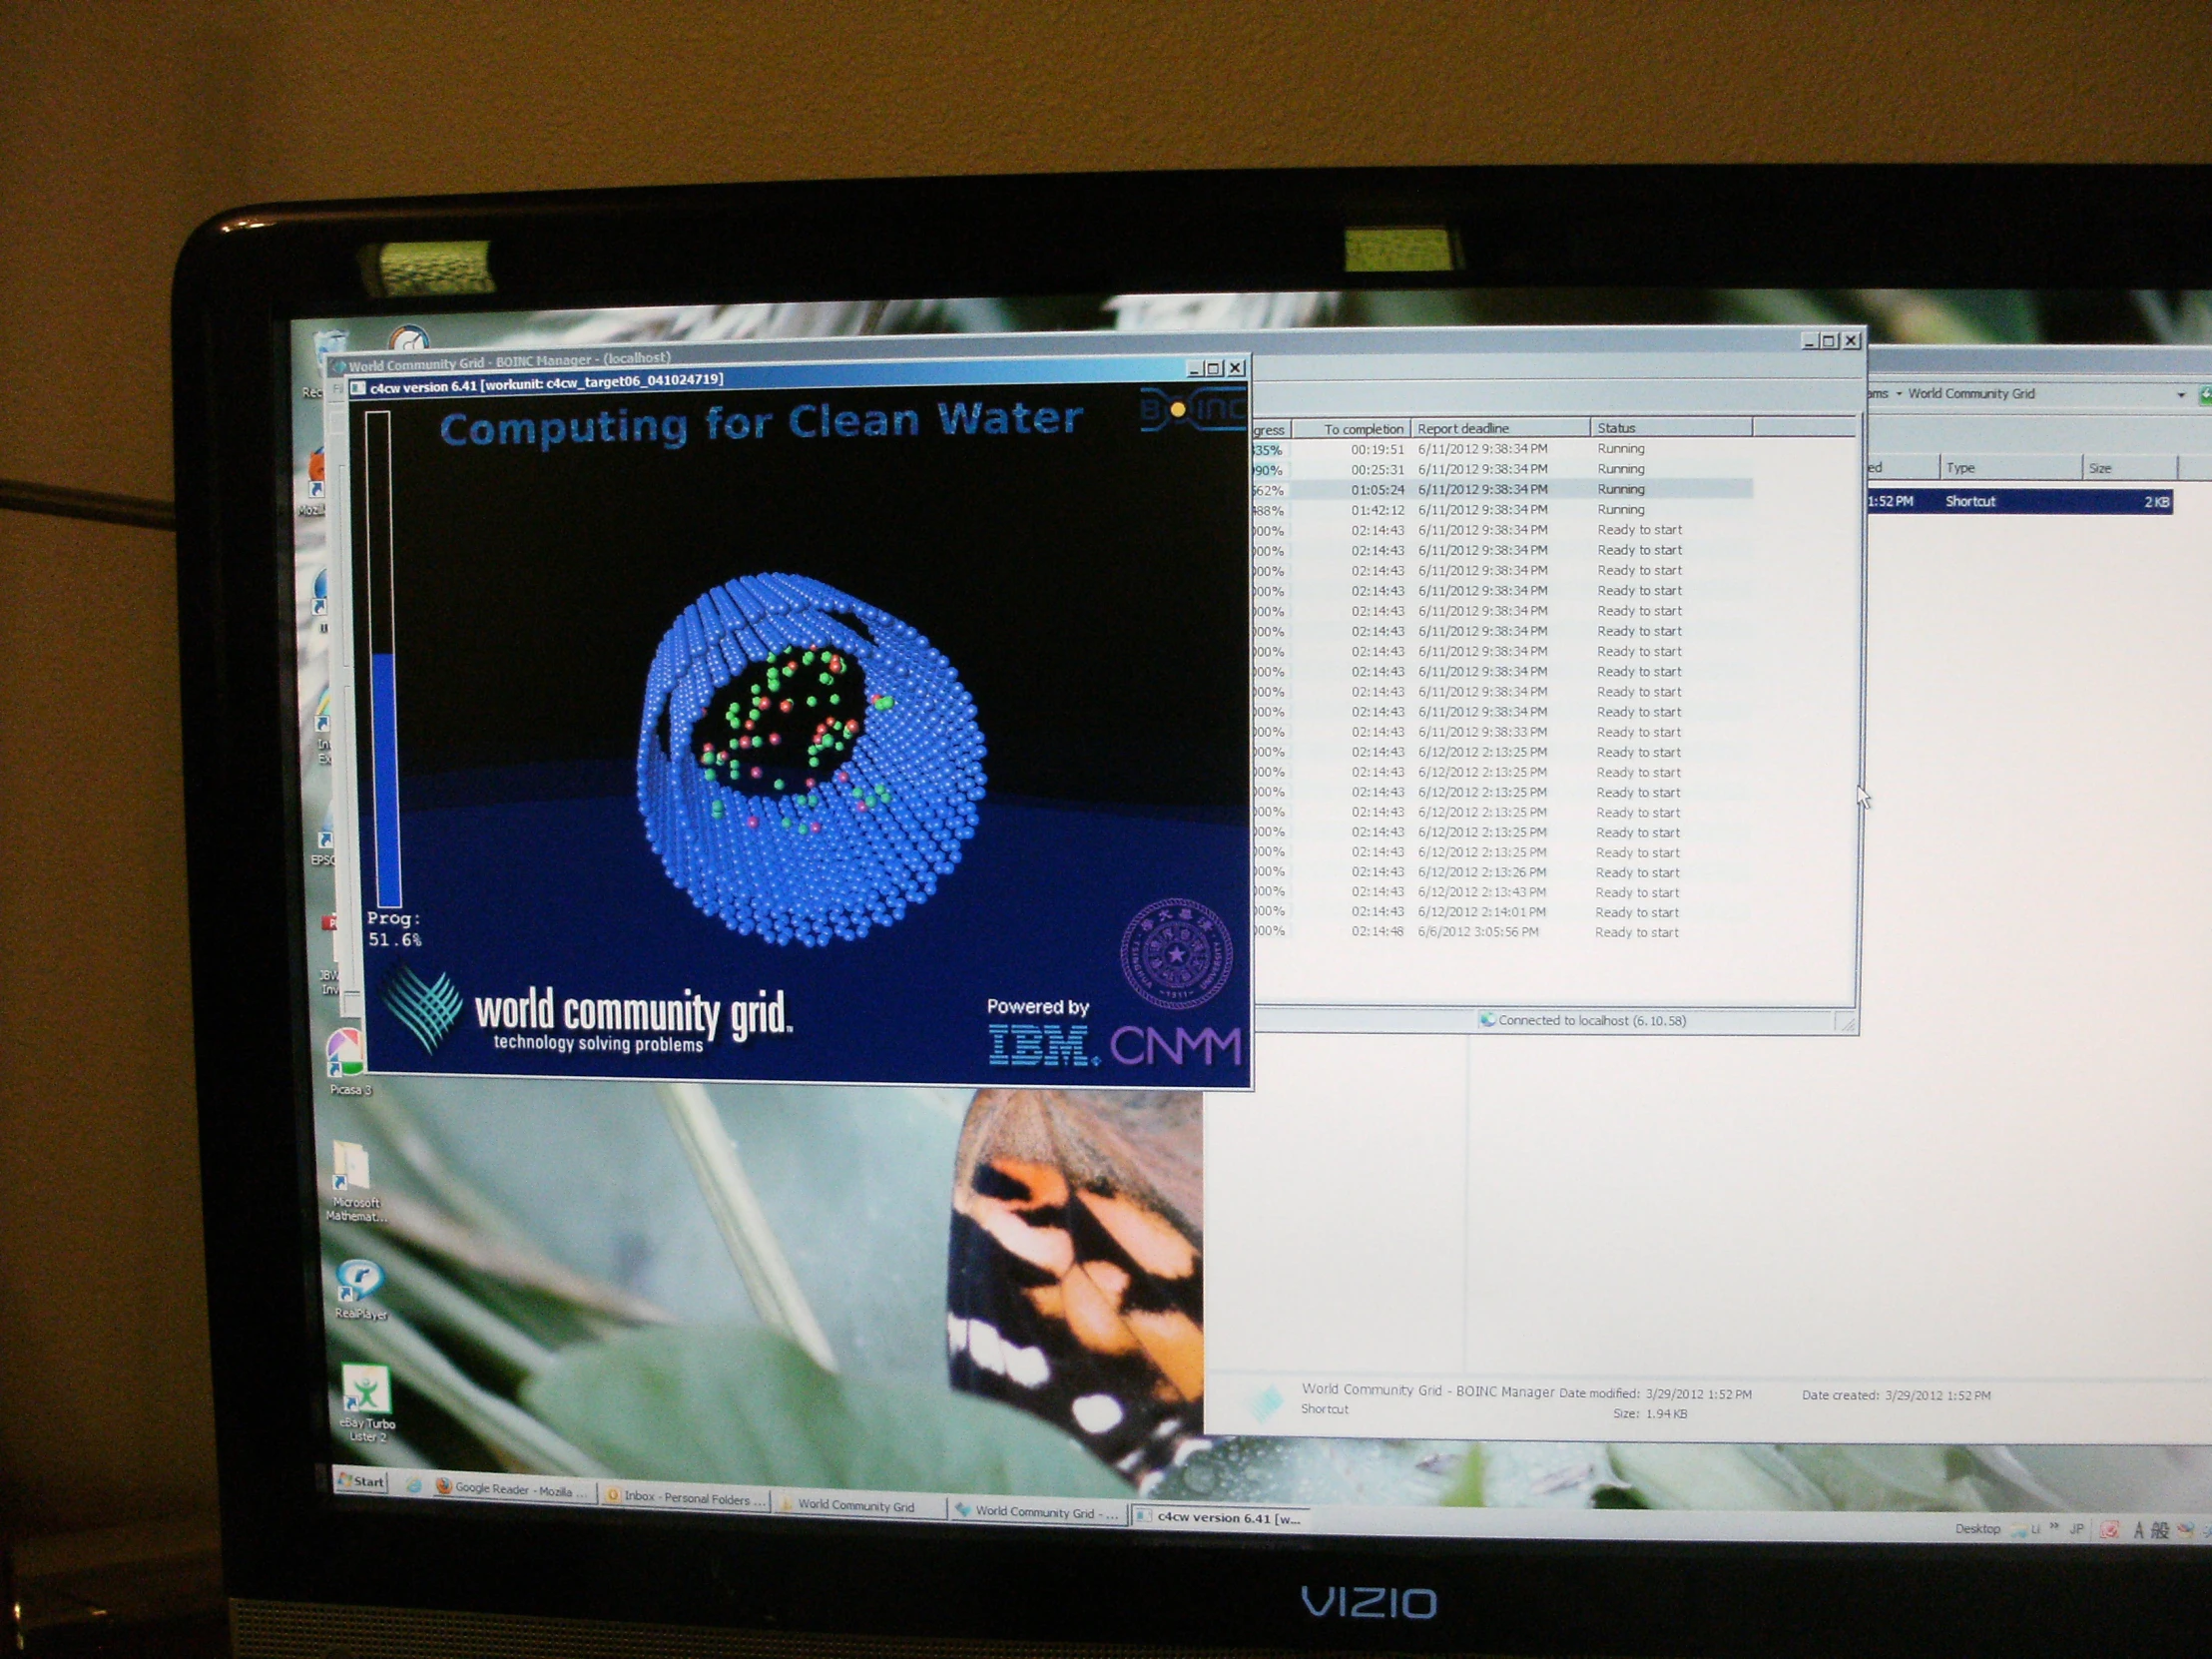 the screen of the computer that displays a monitor displaying images of bugs